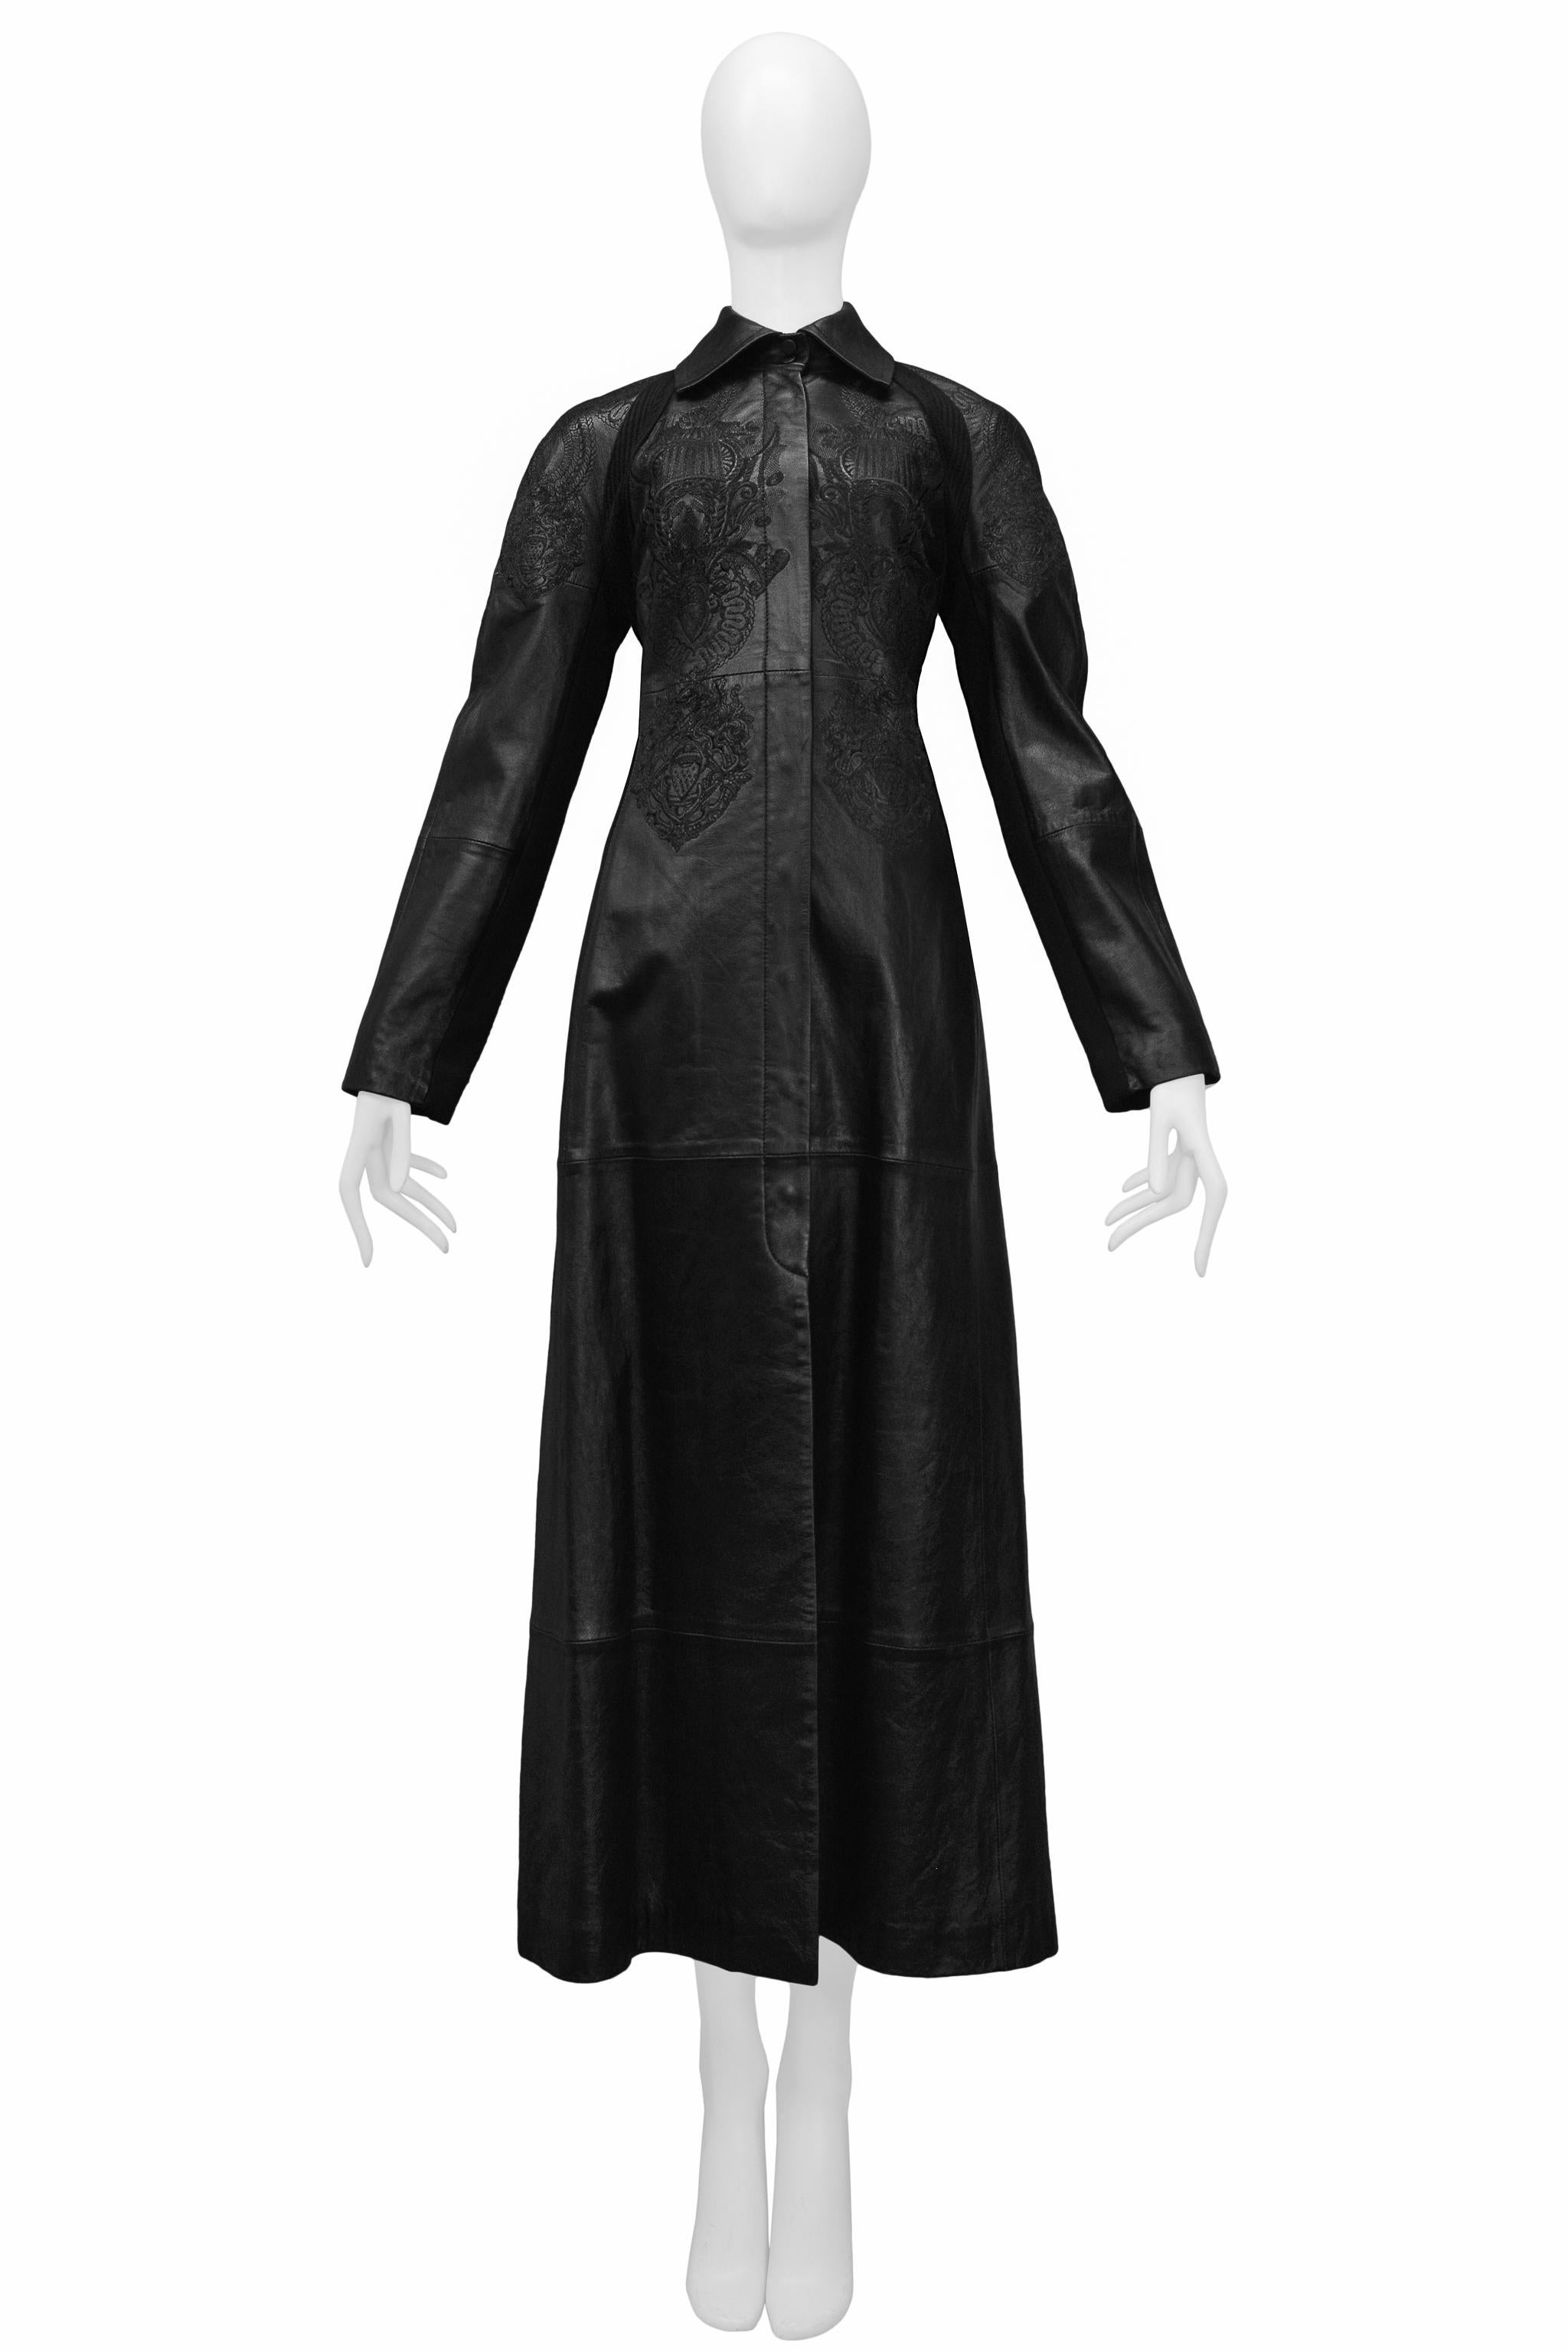 Resurrection Vintage is excited to offer a vintage Gianfranco Ferre black leather and knit maxi coat featuring fancy embroidery, knit insets and back panel, herringbone trim, hidden snaps placket, folding leather collar, and maxi-length.